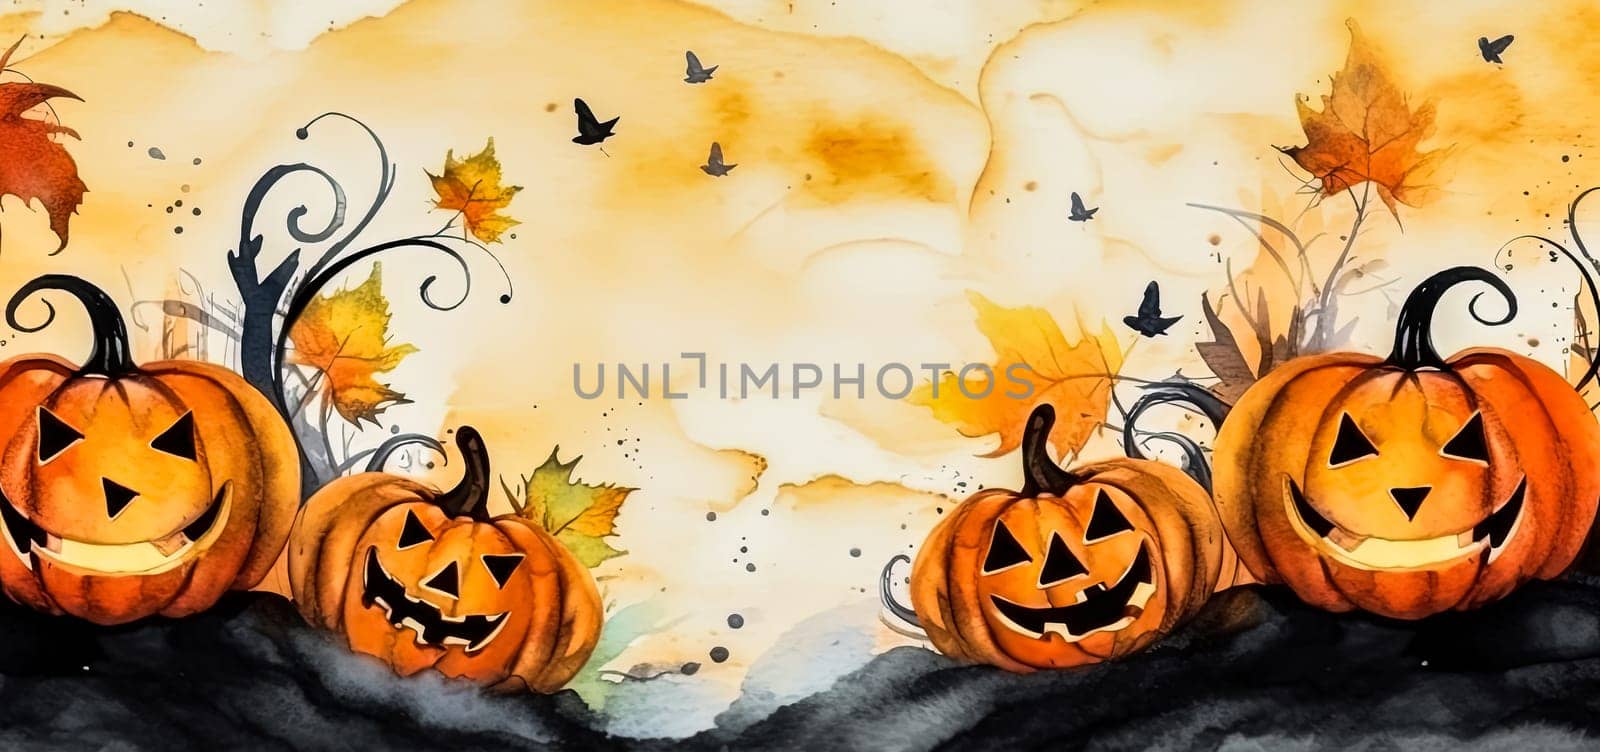 A painting of pumpkins with a spooky Halloween theme by Alla_Morozova93